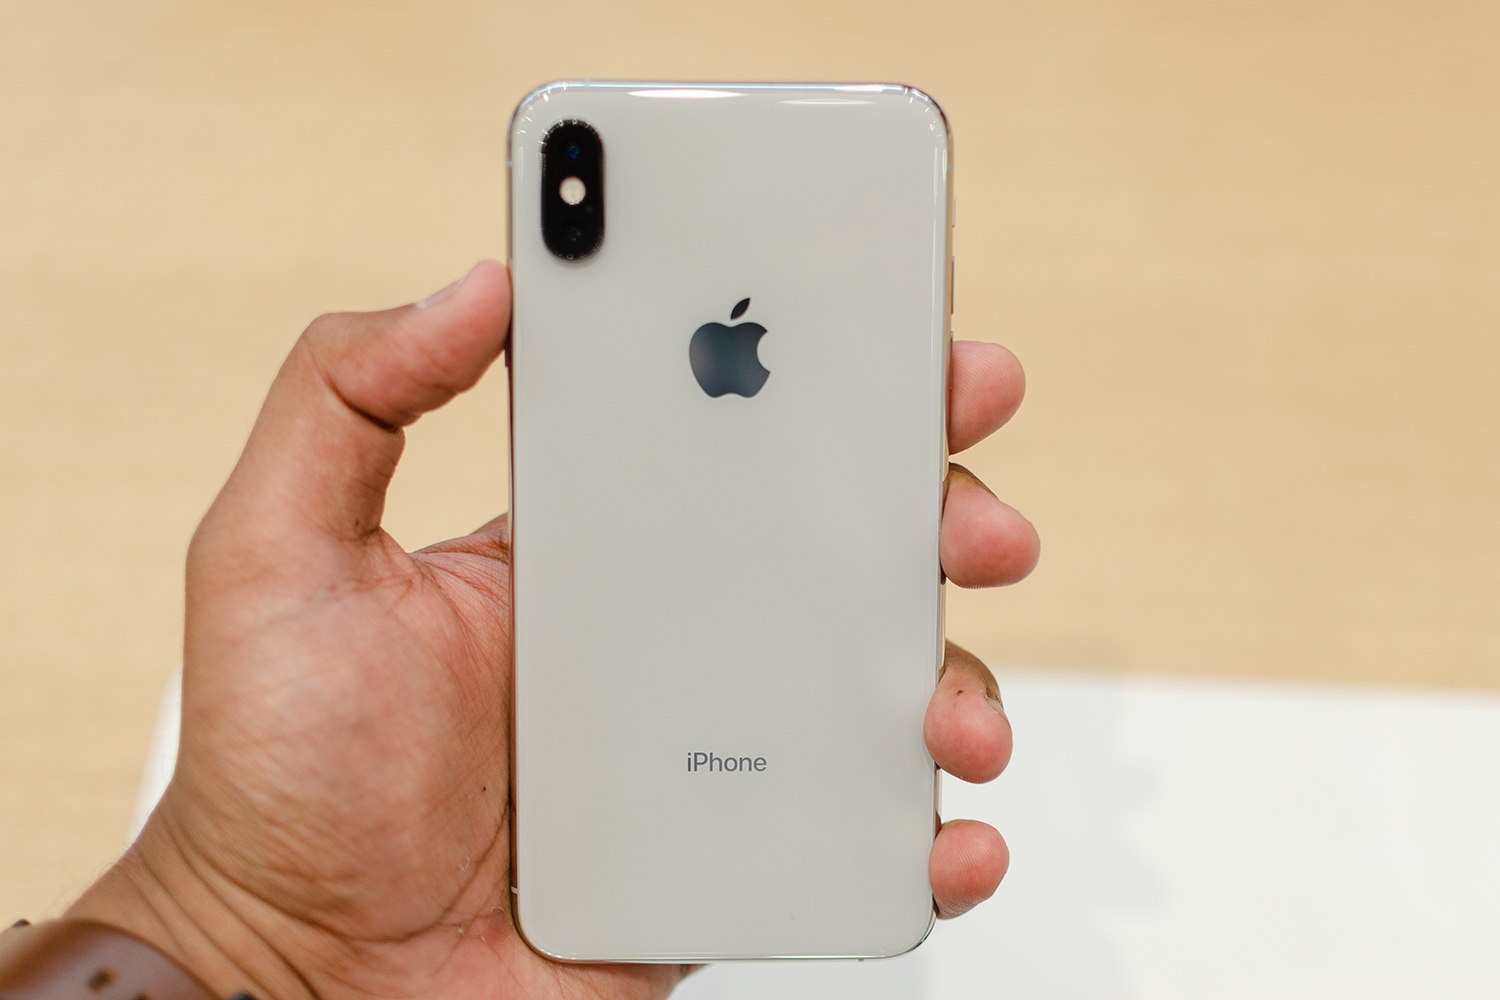 iPhone 13 Pro Max vs iPhone XS Max - Which Should You Choose? 